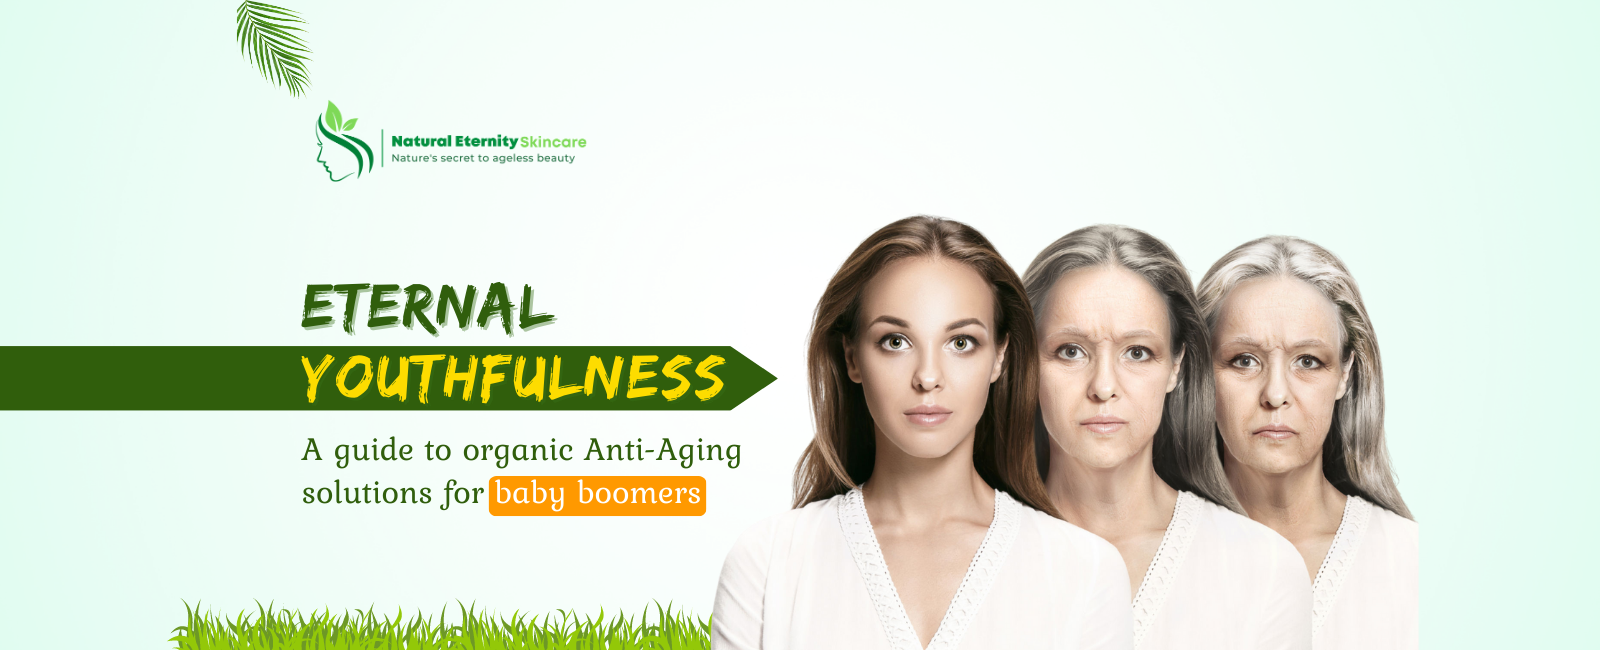 Organic anti-aging solutions for baby boomers